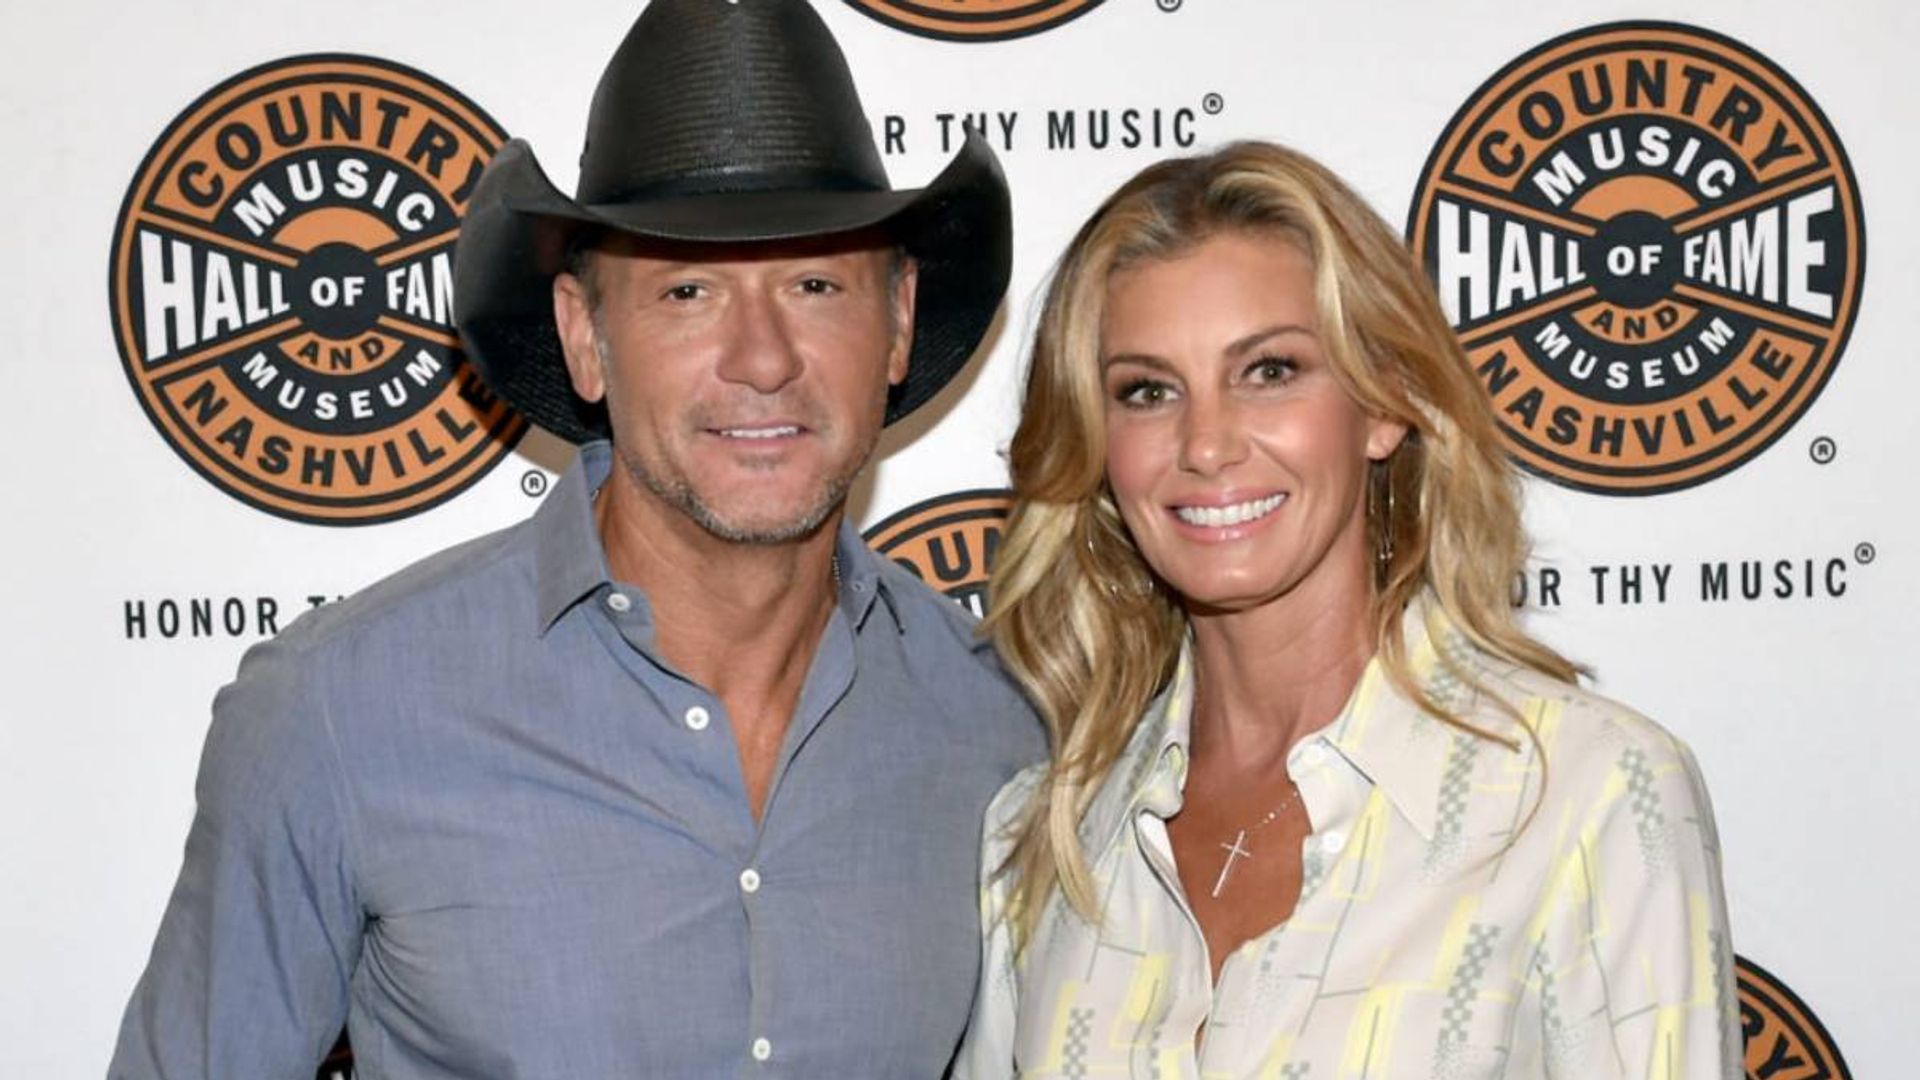 faith hill and tim mcgraw at the country music hall of fame museum in Nashville